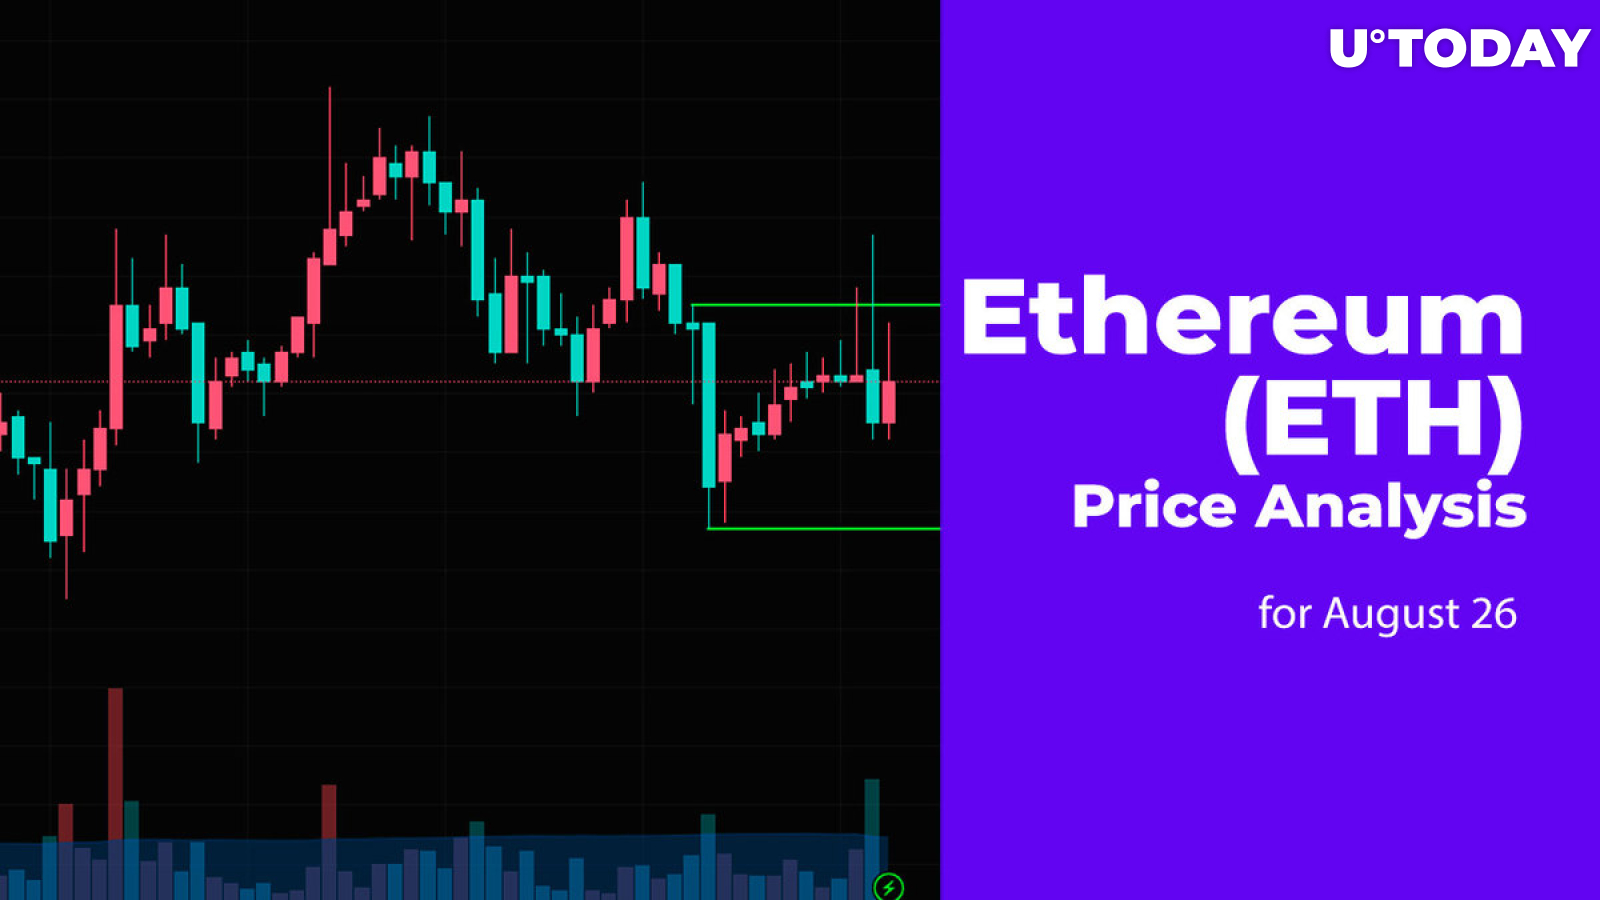 Ethereum (ETH) Price Analysis for August 26